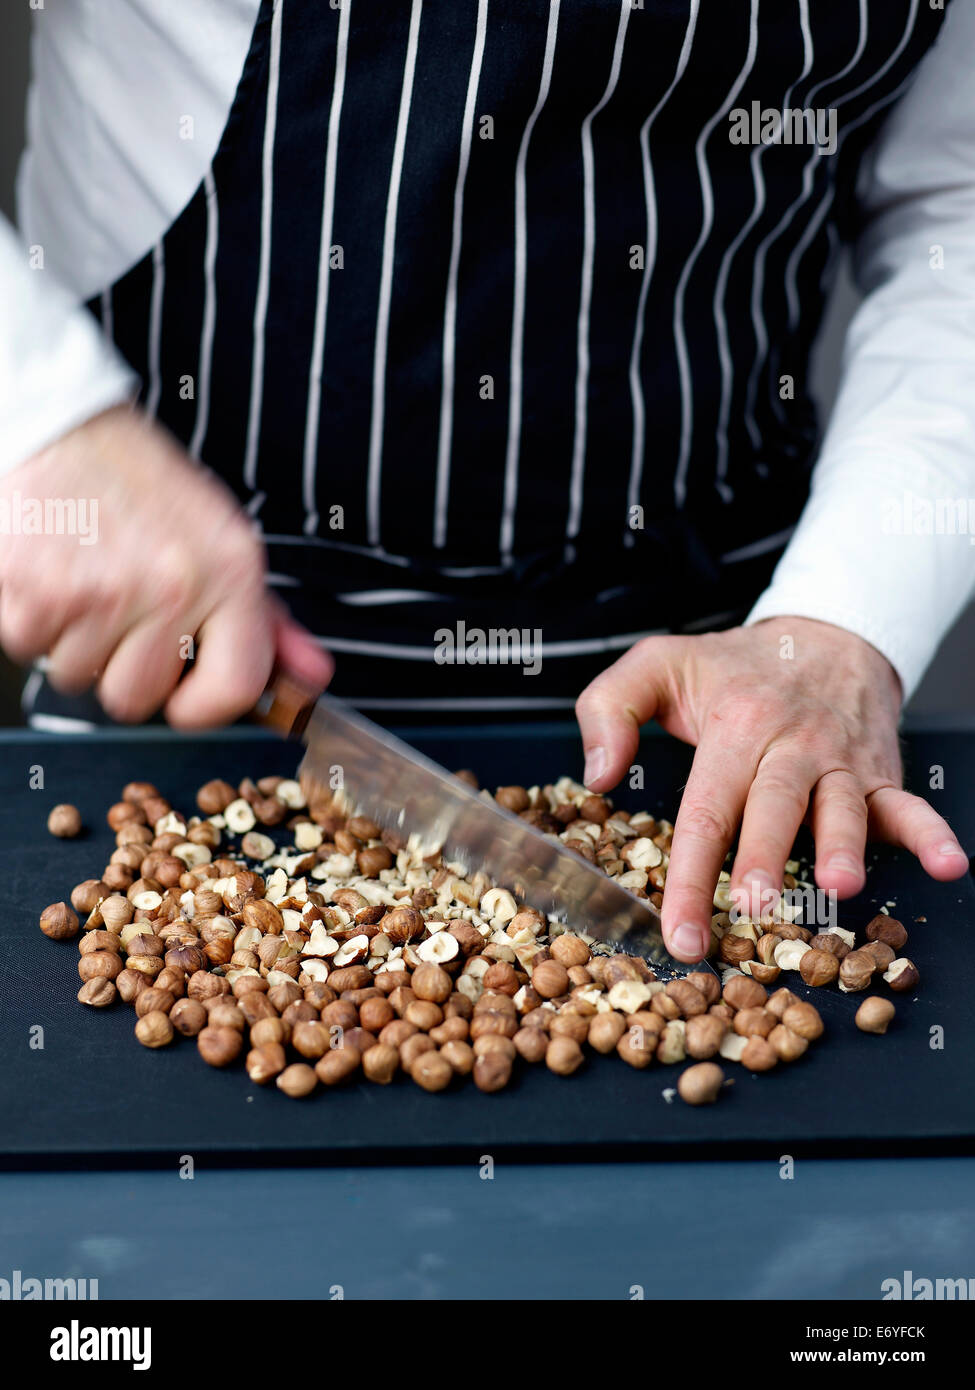 Crushing the hazelnuts with a knife Stock Photo